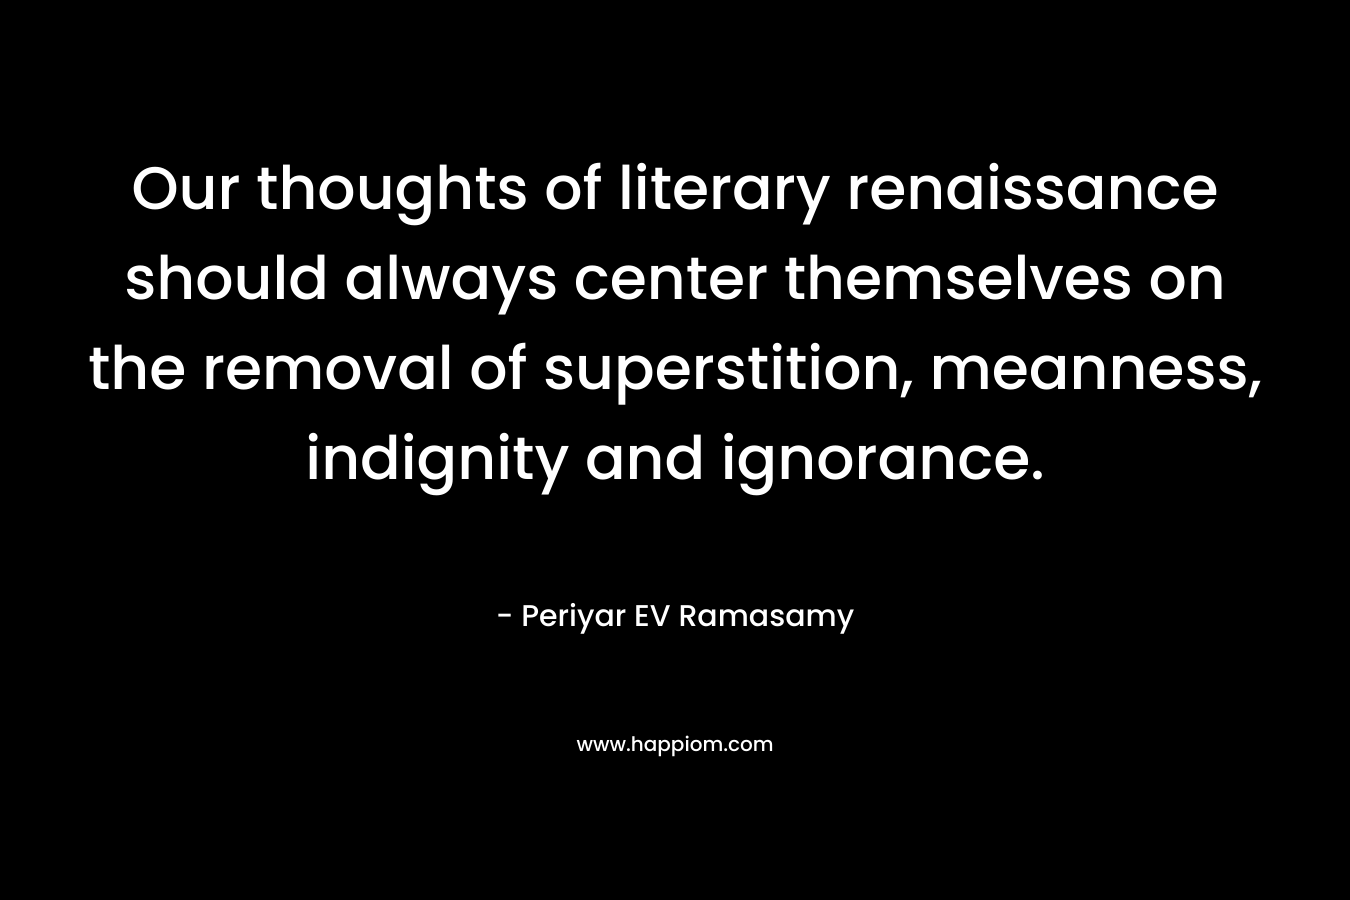 Our thoughts of literary renaissance should always center themselves on the removal of superstition, meanness, indignity and ignorance. – Periyar EV Ramasamy